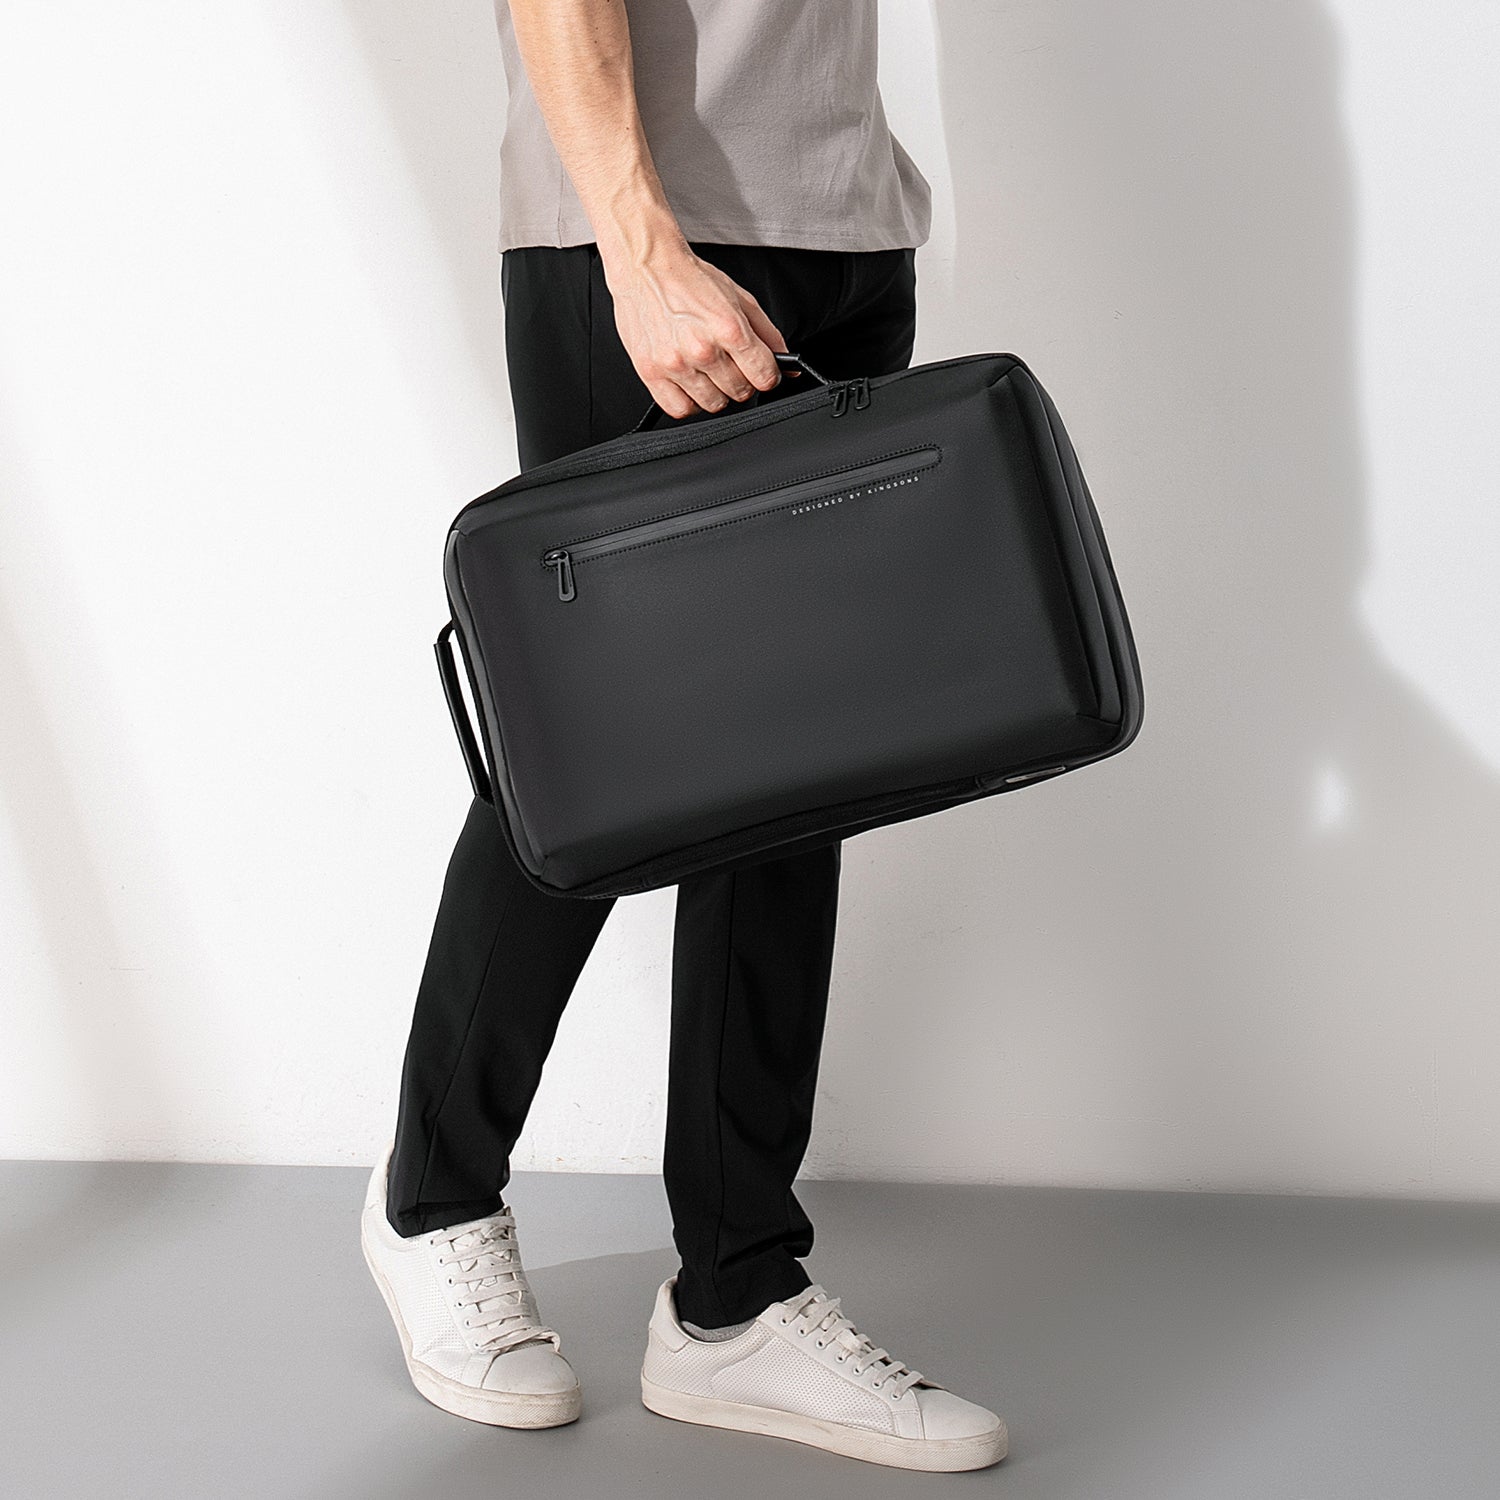 Comity - The Kingsons Commuter Backpack